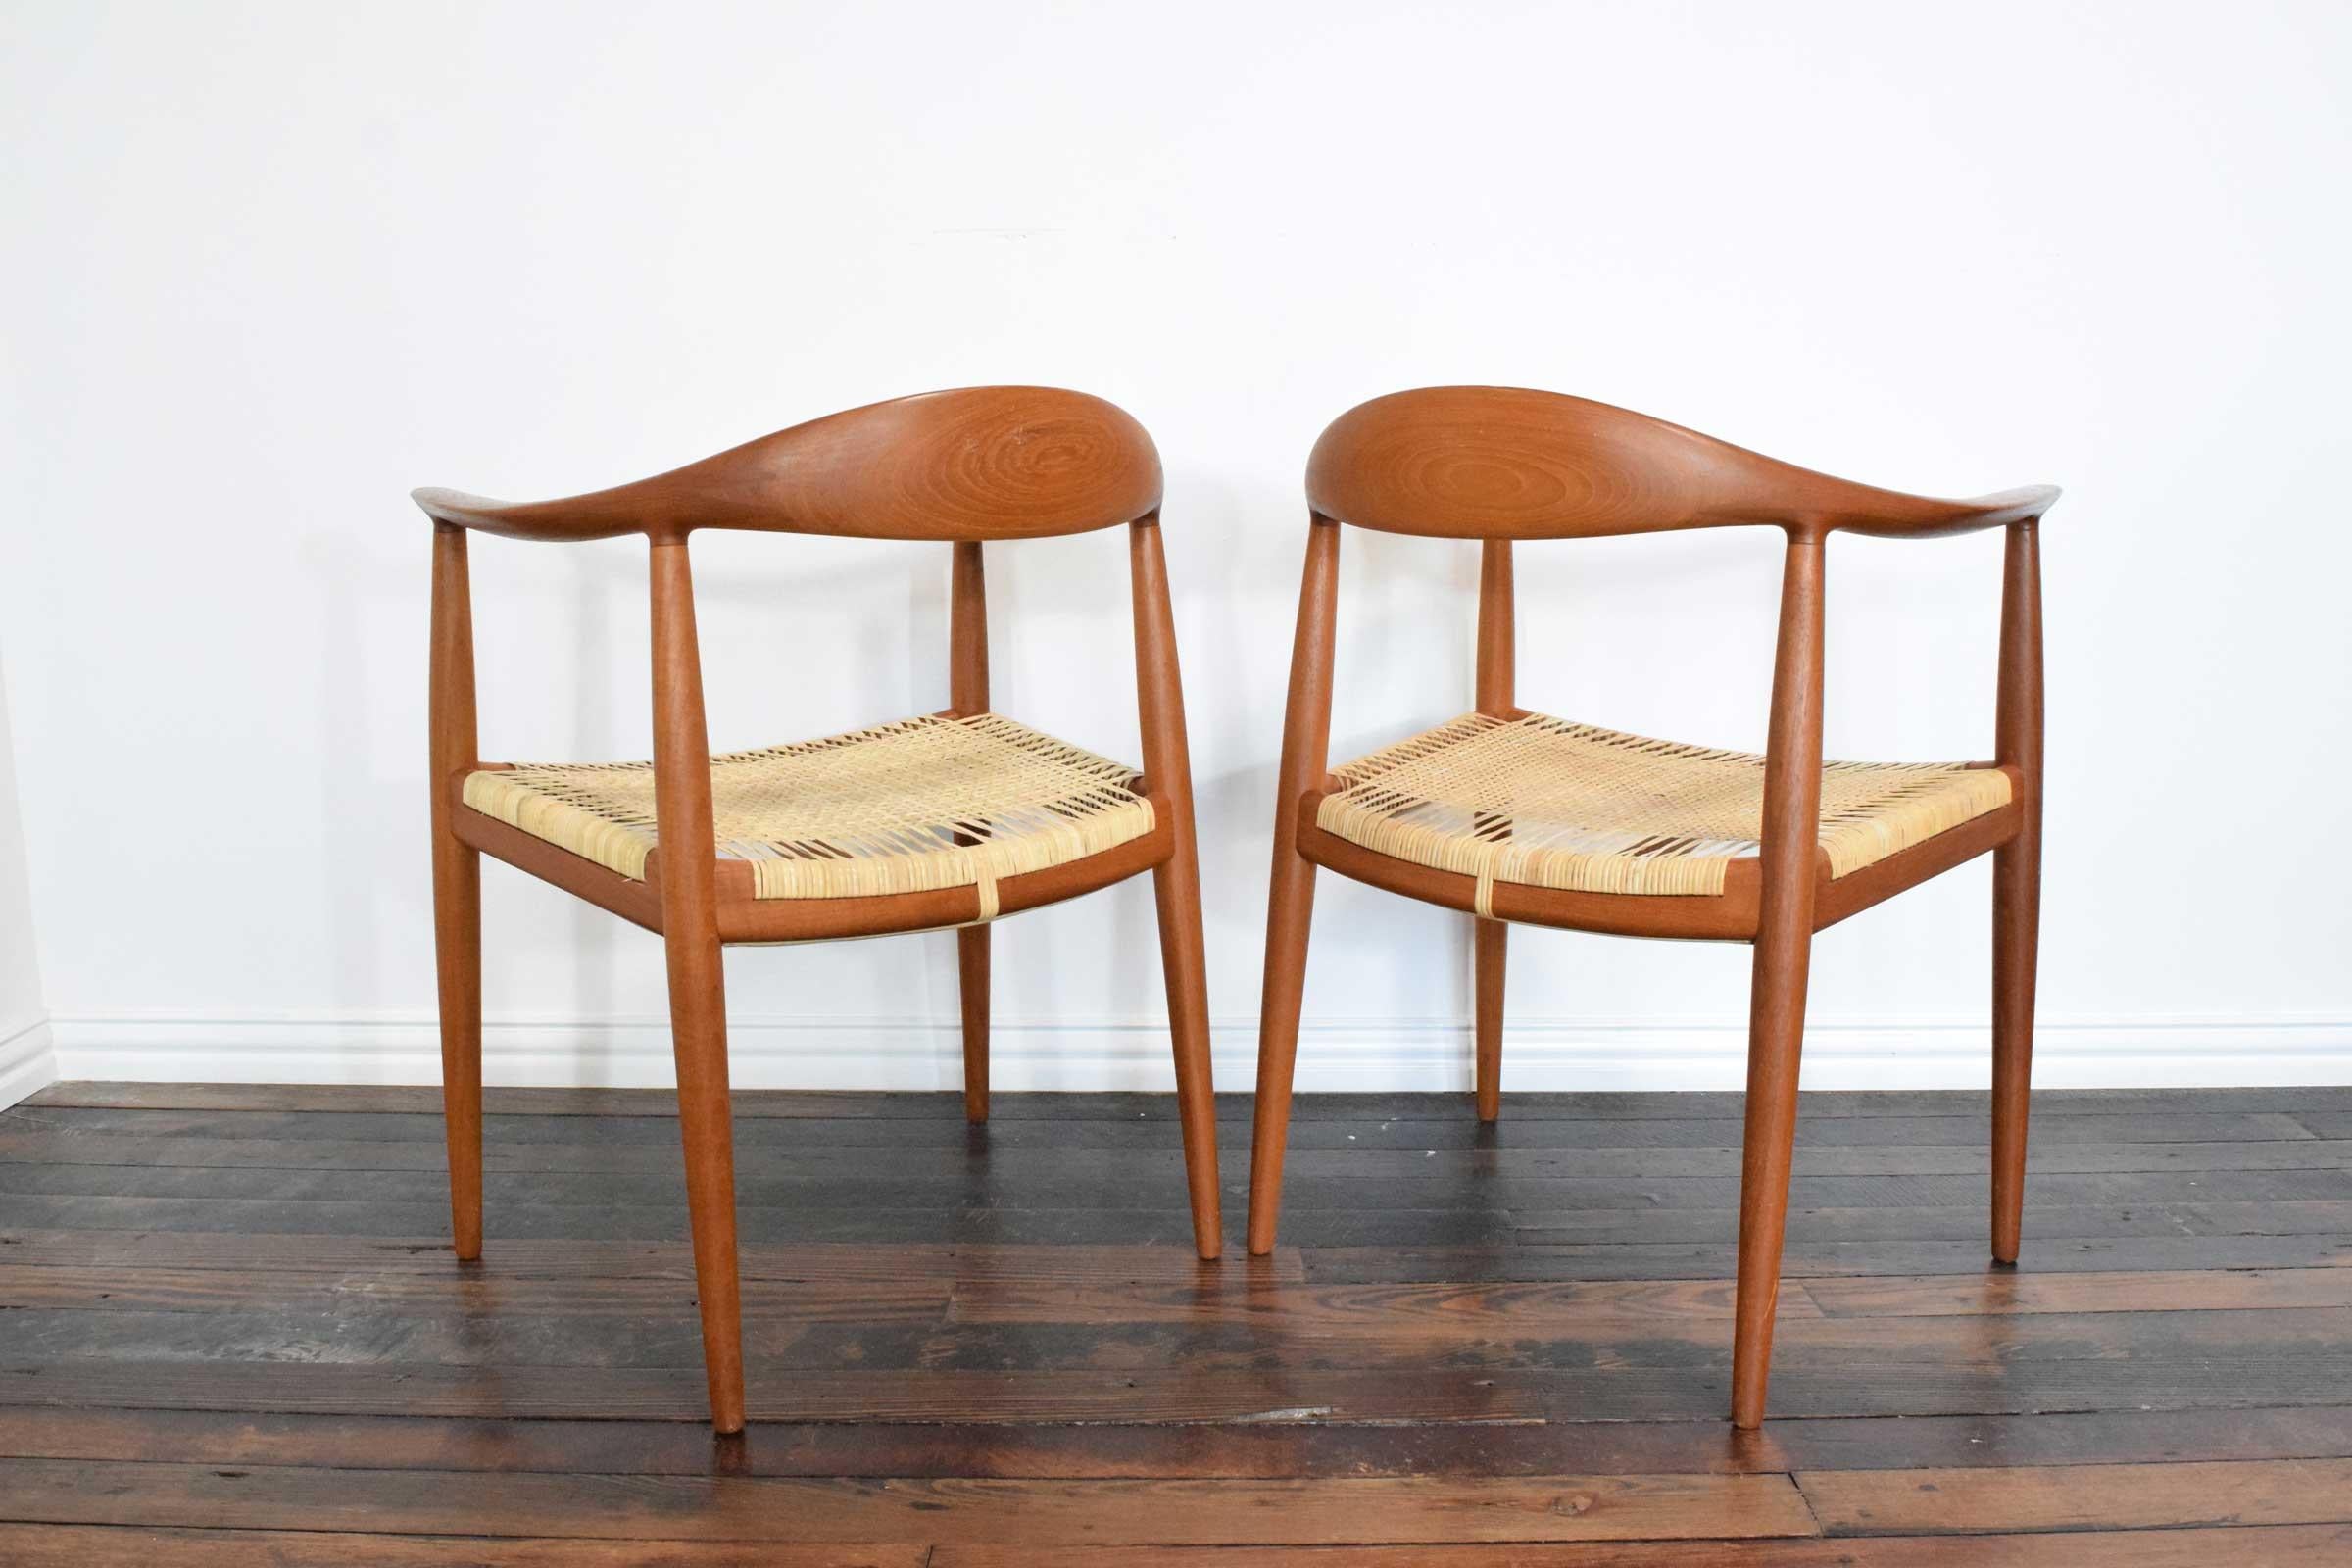 Pair of Hans Wegner Round Chairs In Good Condition For Sale In Dallas, TX